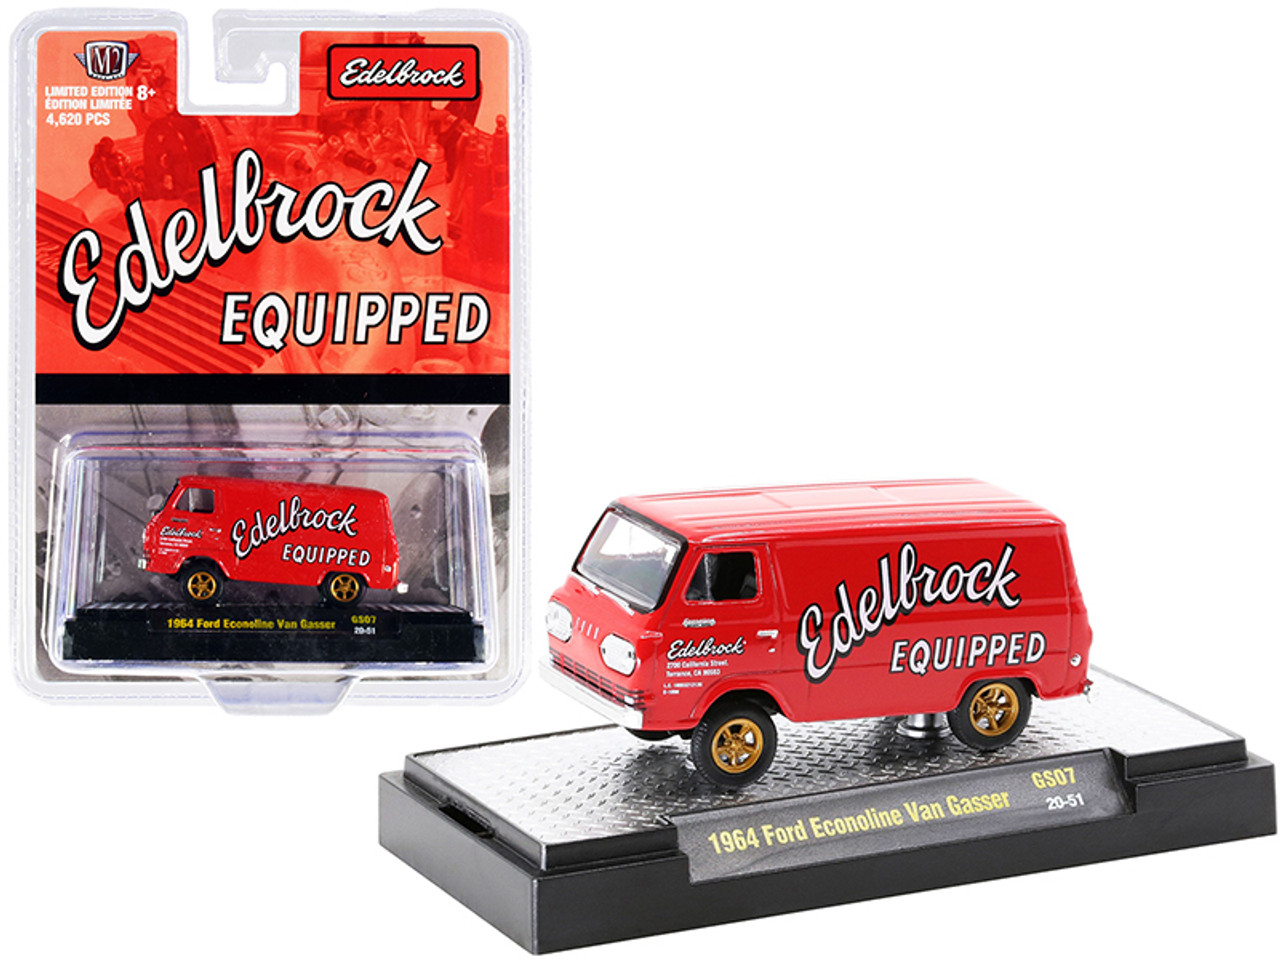 1964 Ford Econoline Van Gasser Bright Red "Edelbrock Equipped" Limited Edition to 4620 pieces Worldwide 1/64 Diecast Model Car by M2 Machines